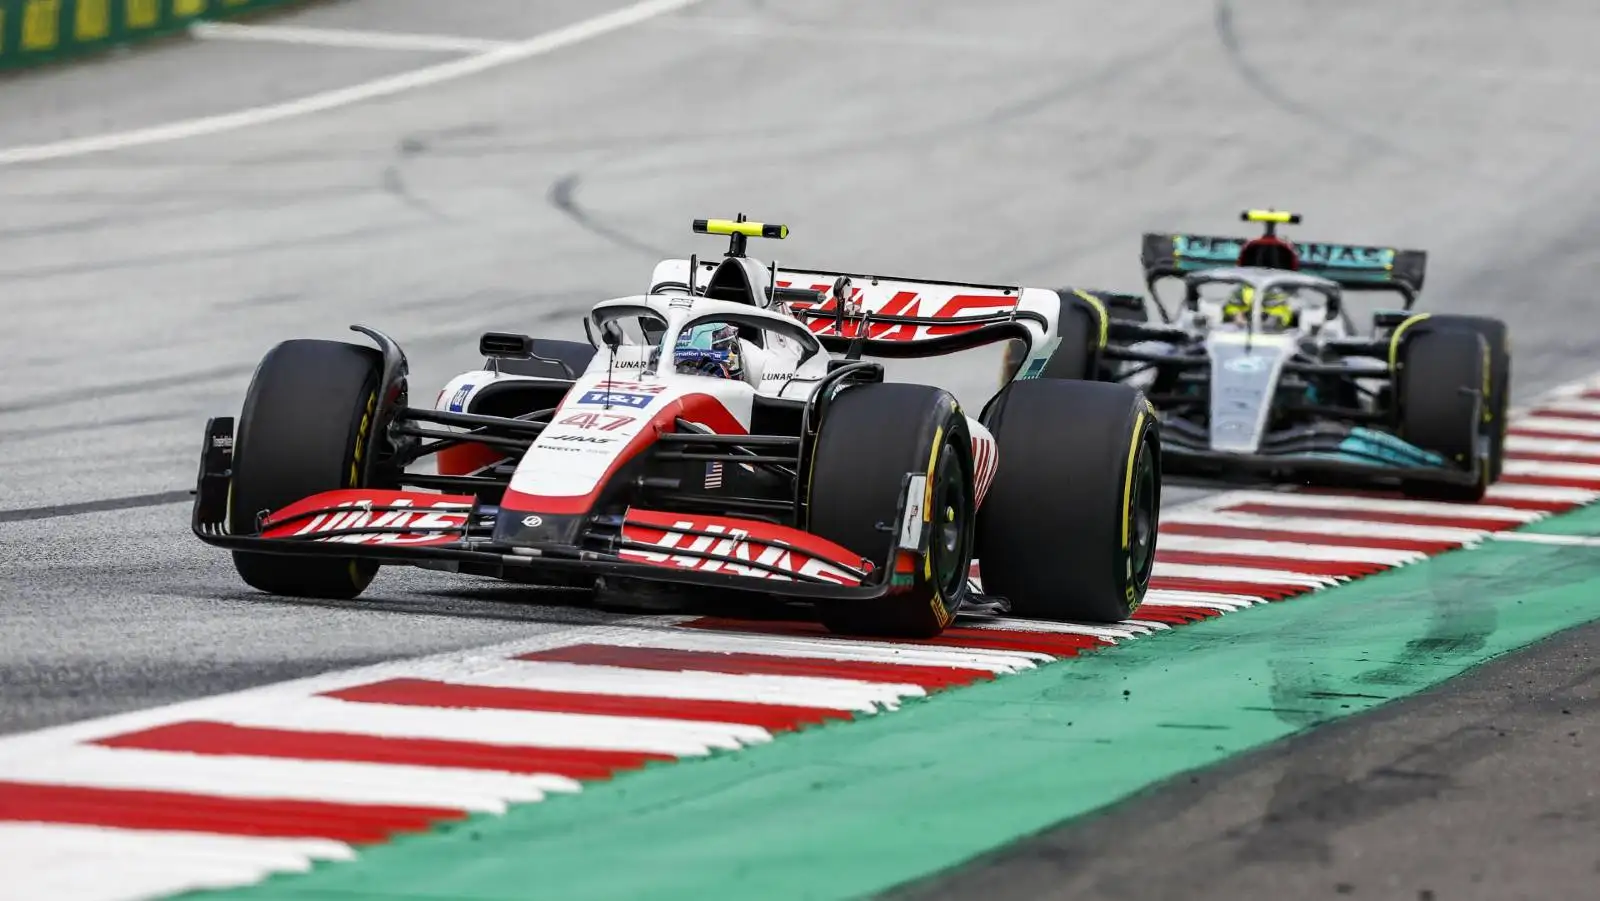 Mick Schumacher's Haas ahead of Lewis Hamilton's Mercedes. Red Bull Ring July 2022.